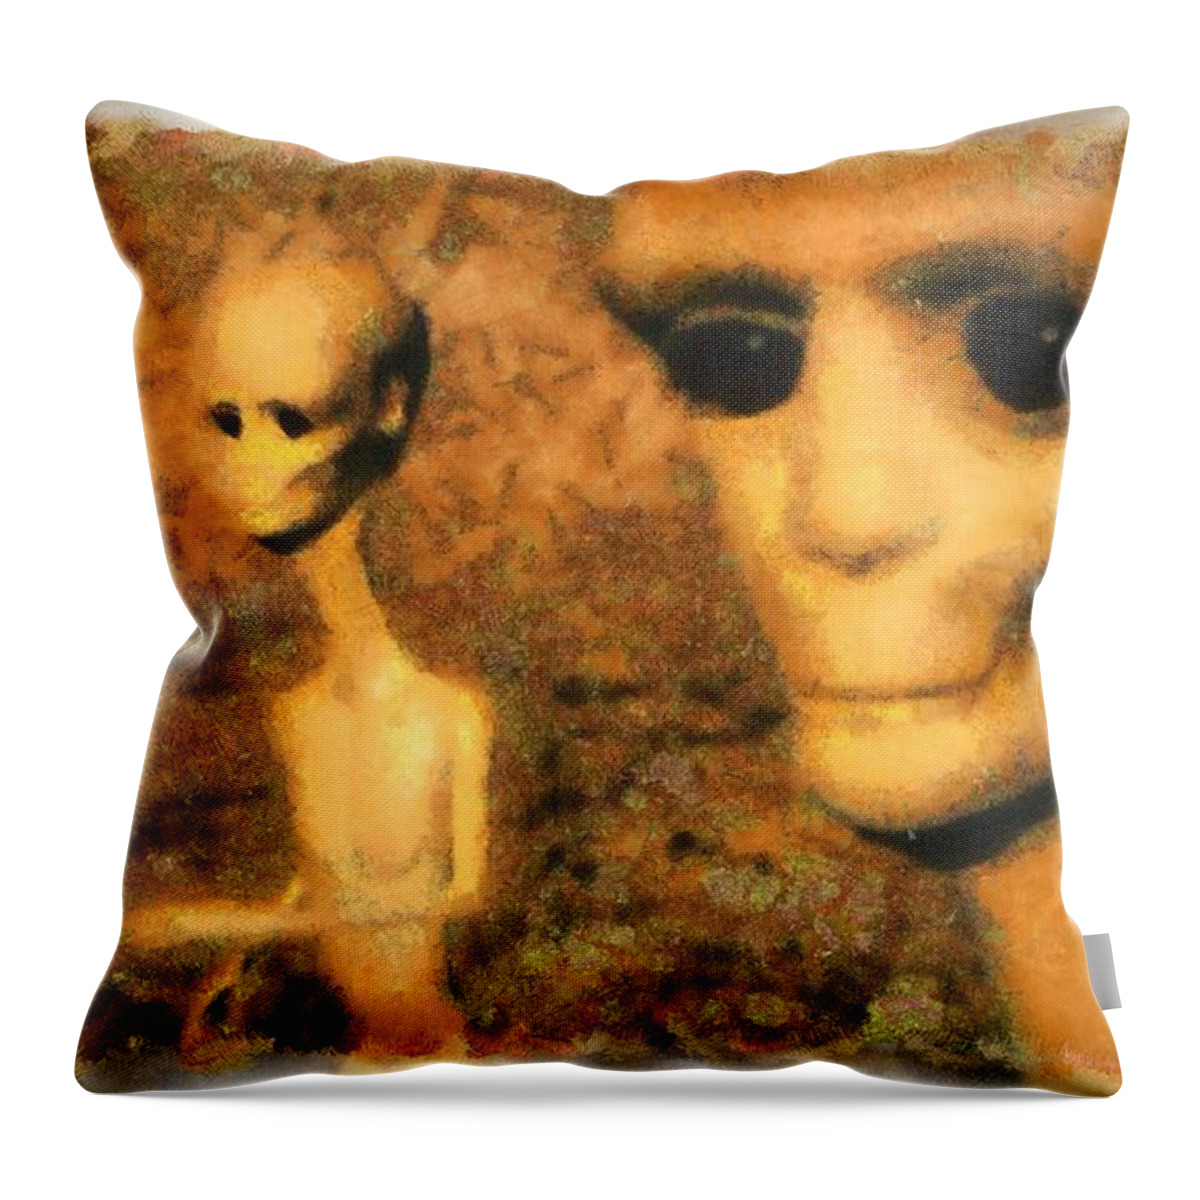 Ufo Throw Pillow featuring the painting Alien Friends by Esoterica Art Agency